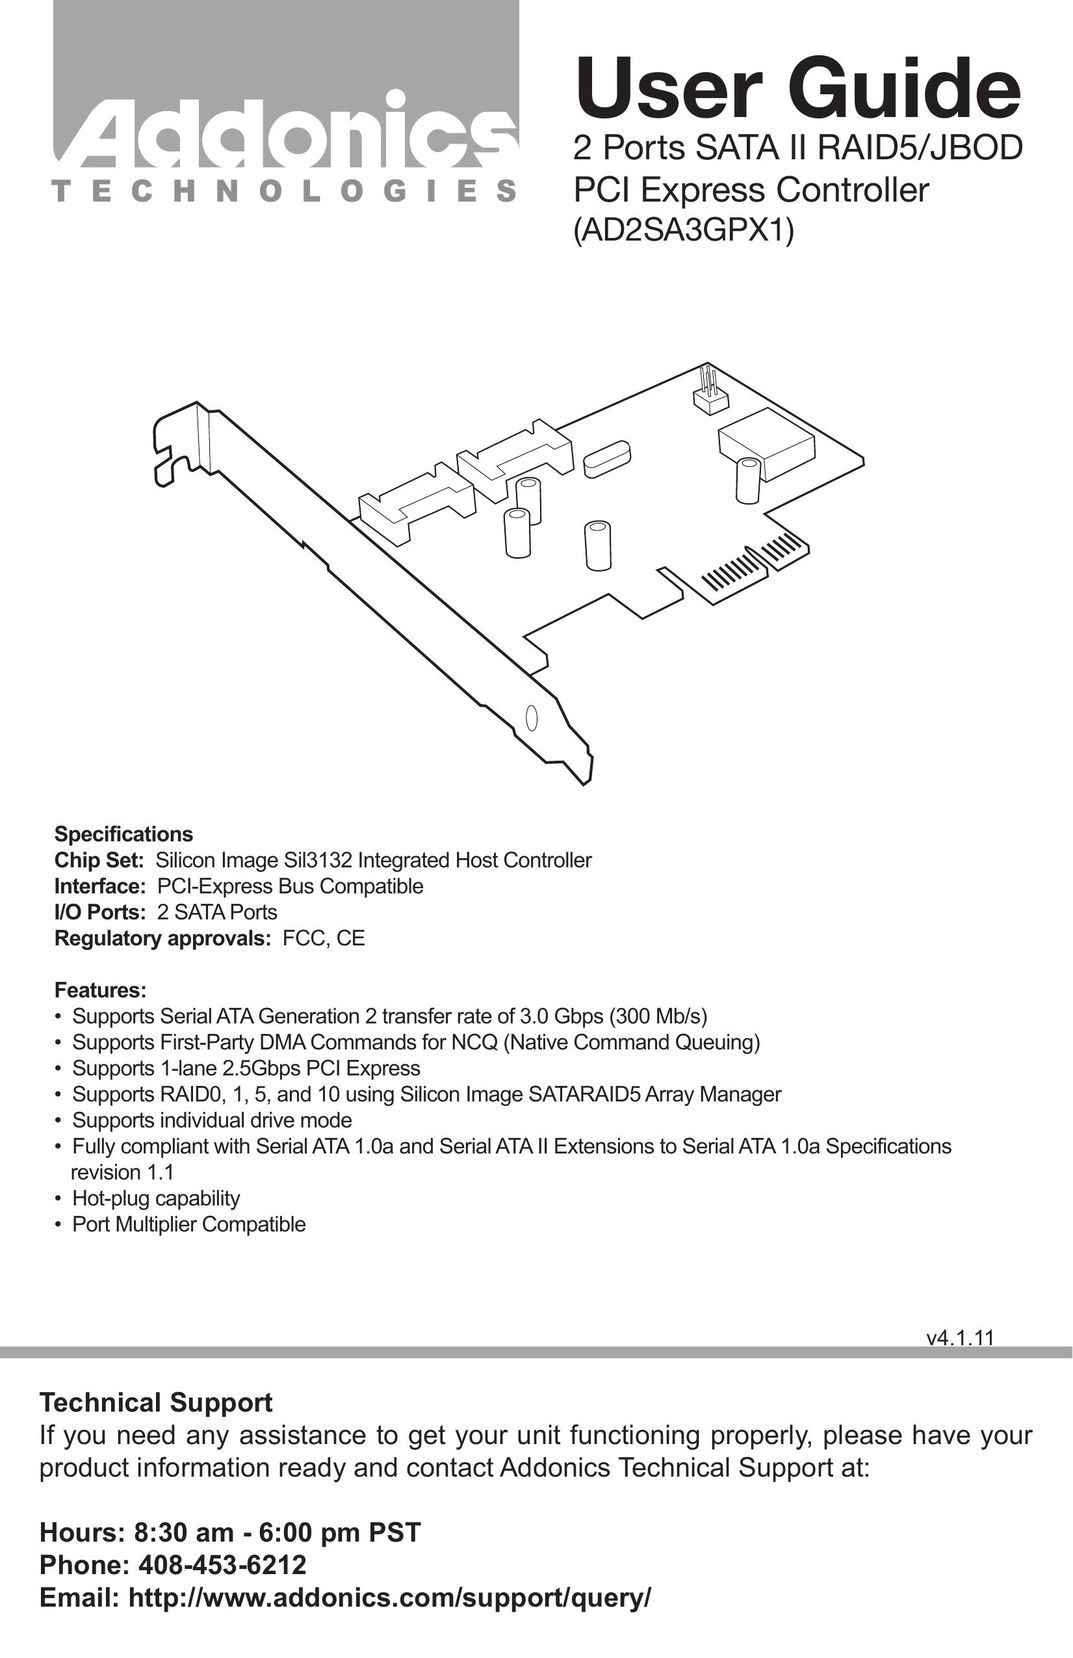 Addonics Technologies ad2sagpx1 Home Theater Server User Manual